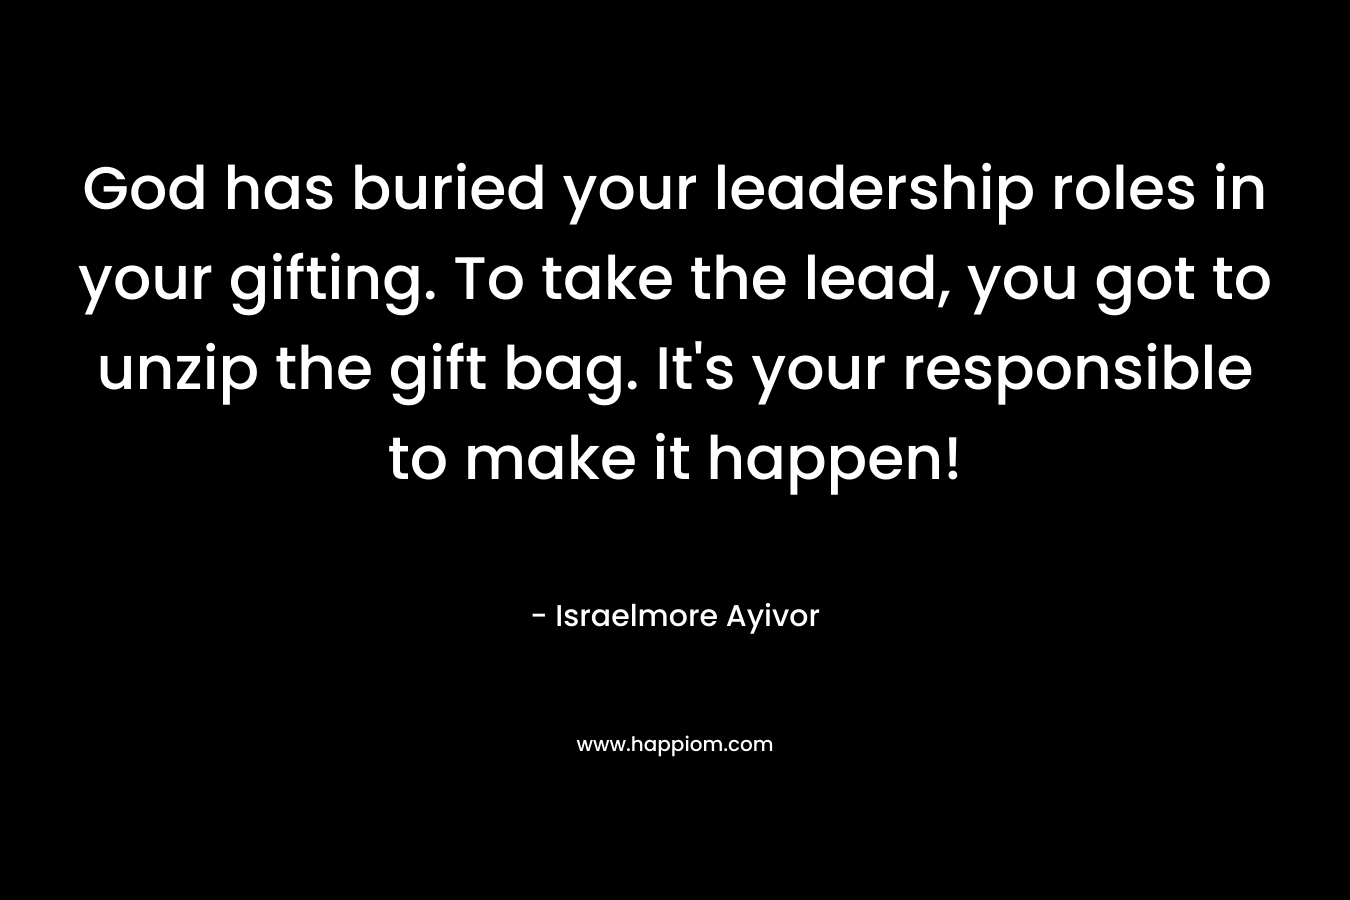 God has buried your leadership roles in your gifting. To take the lead, you got to unzip the gift bag. It’s your responsible to make it happen! – Israelmore Ayivor